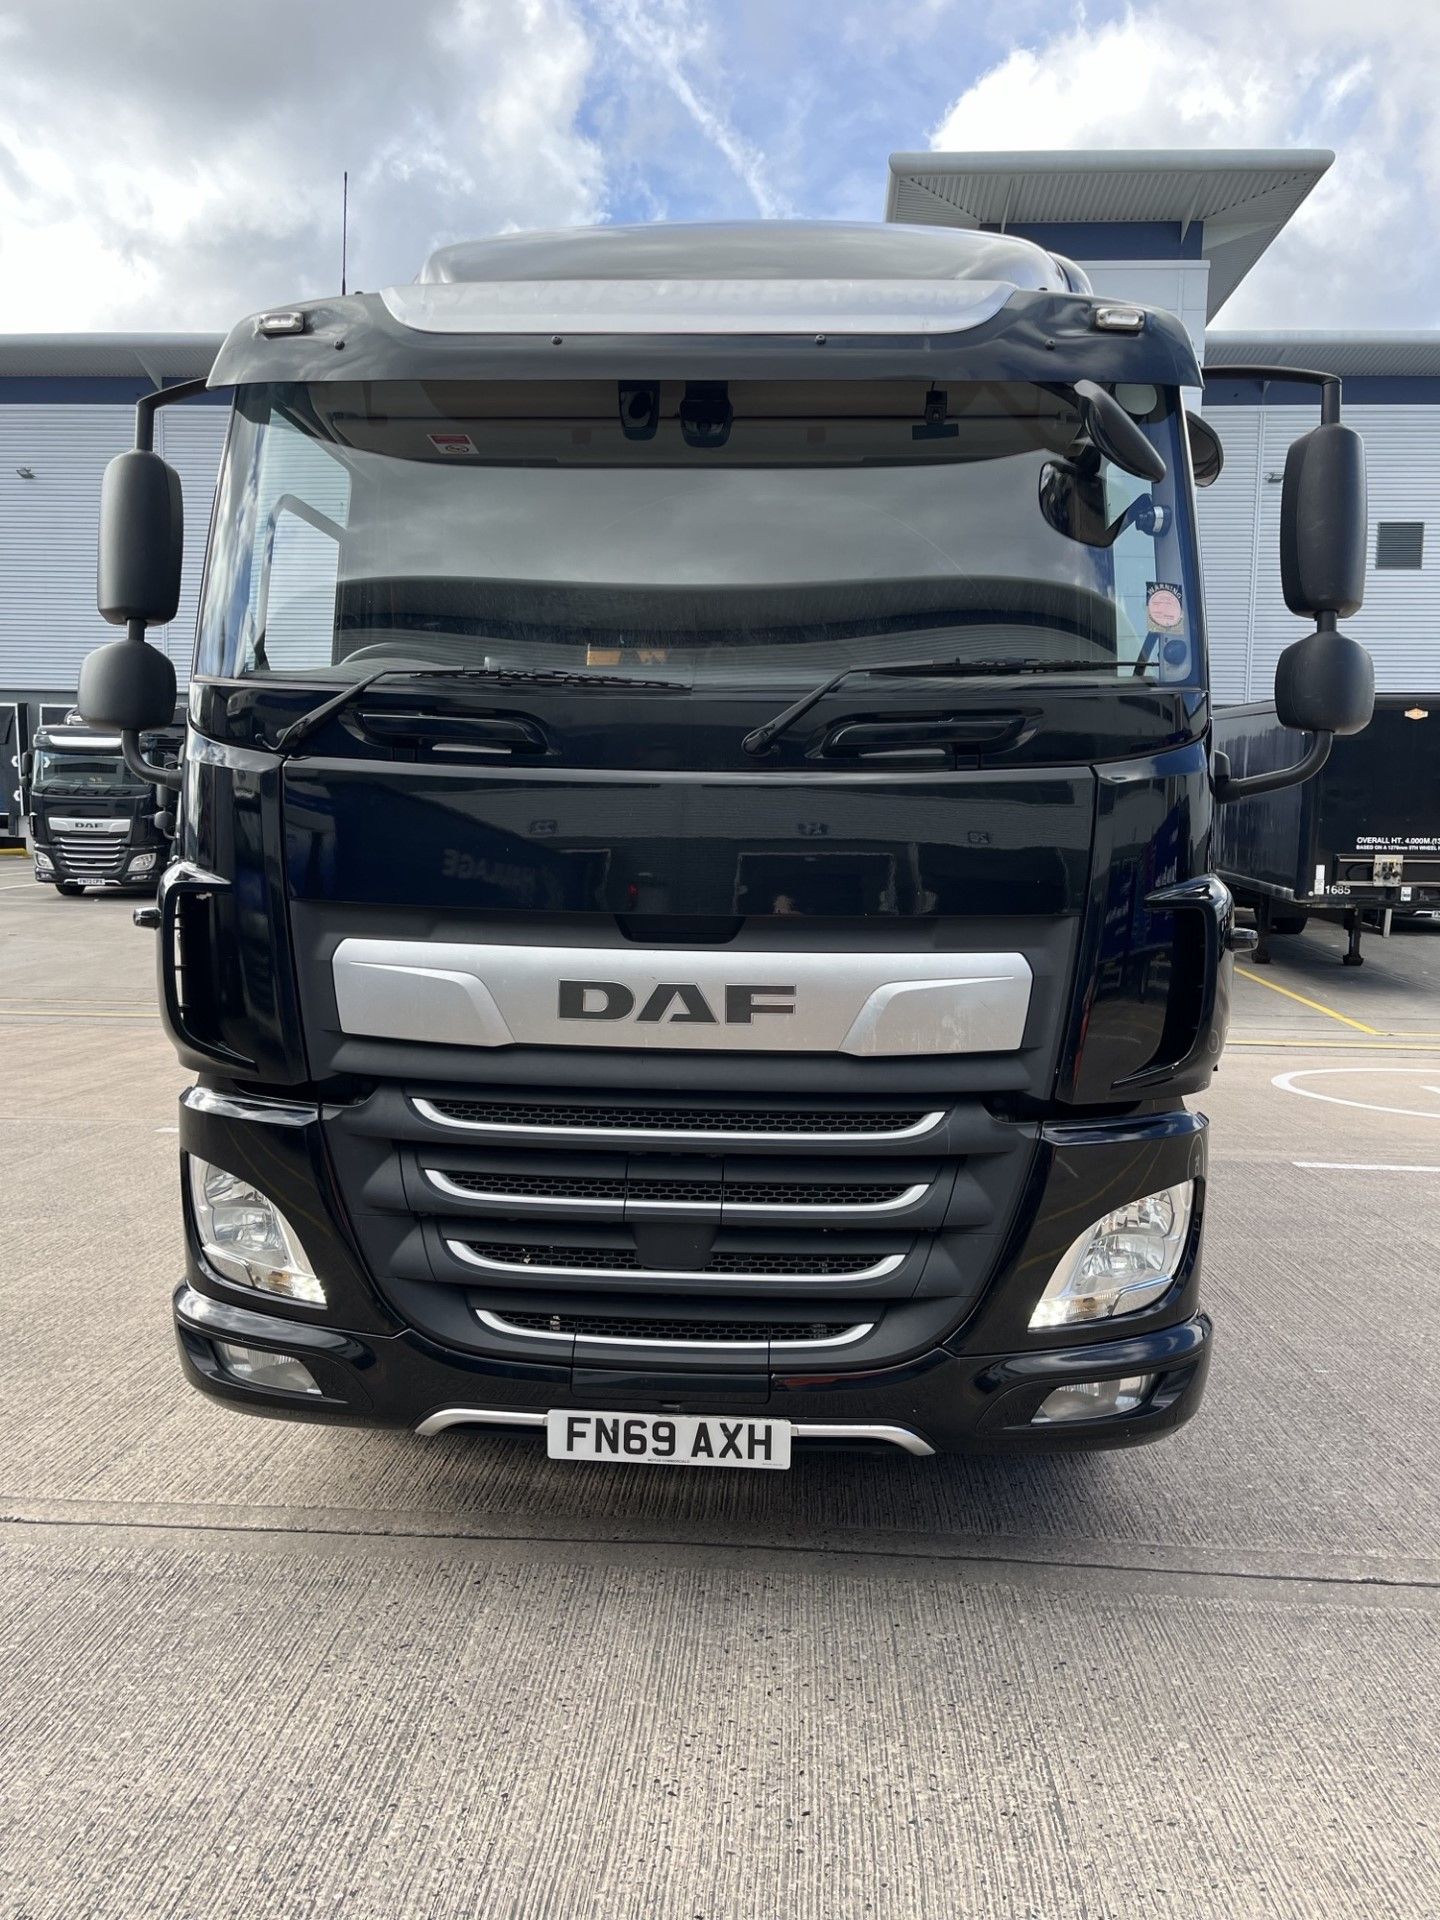 2019, DAF CF 260 FA (Ex-Fleet Owned & Maintained) - FN69 AXH (18 Ton Rigid Truck with Tail Lift) - Image 3 of 14